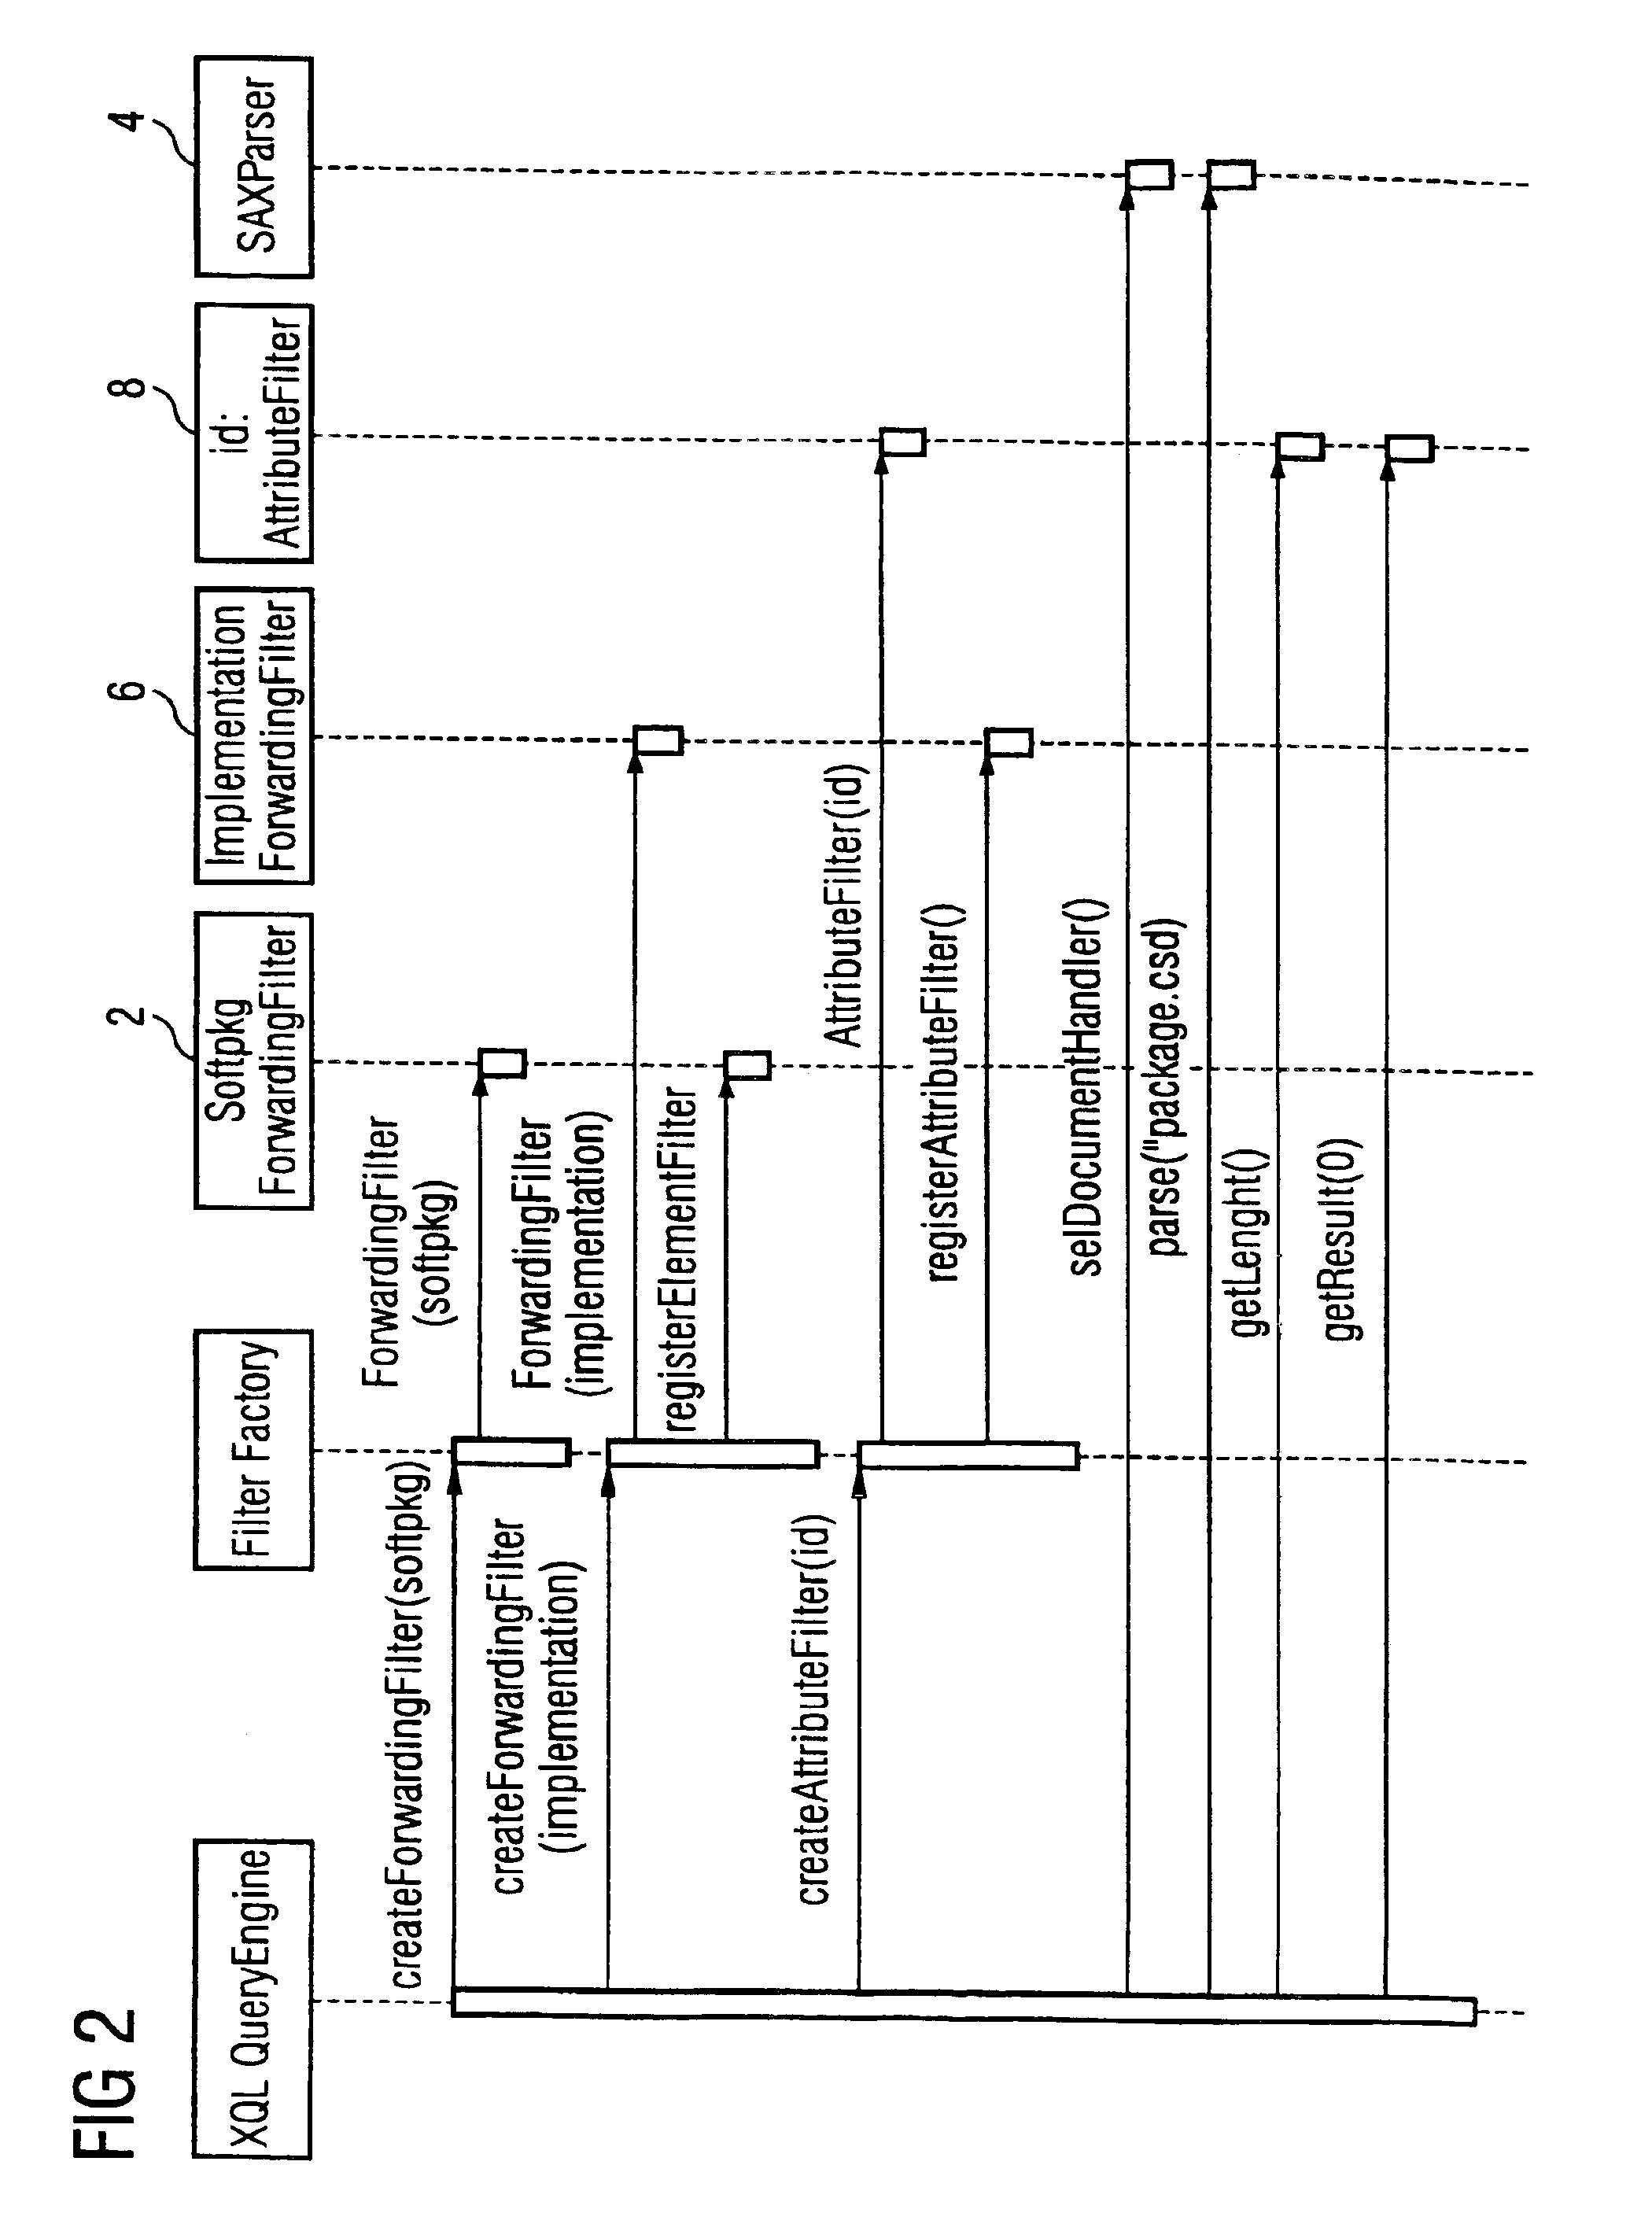 Method and device for performing a query on a markup document to conserve memory and time